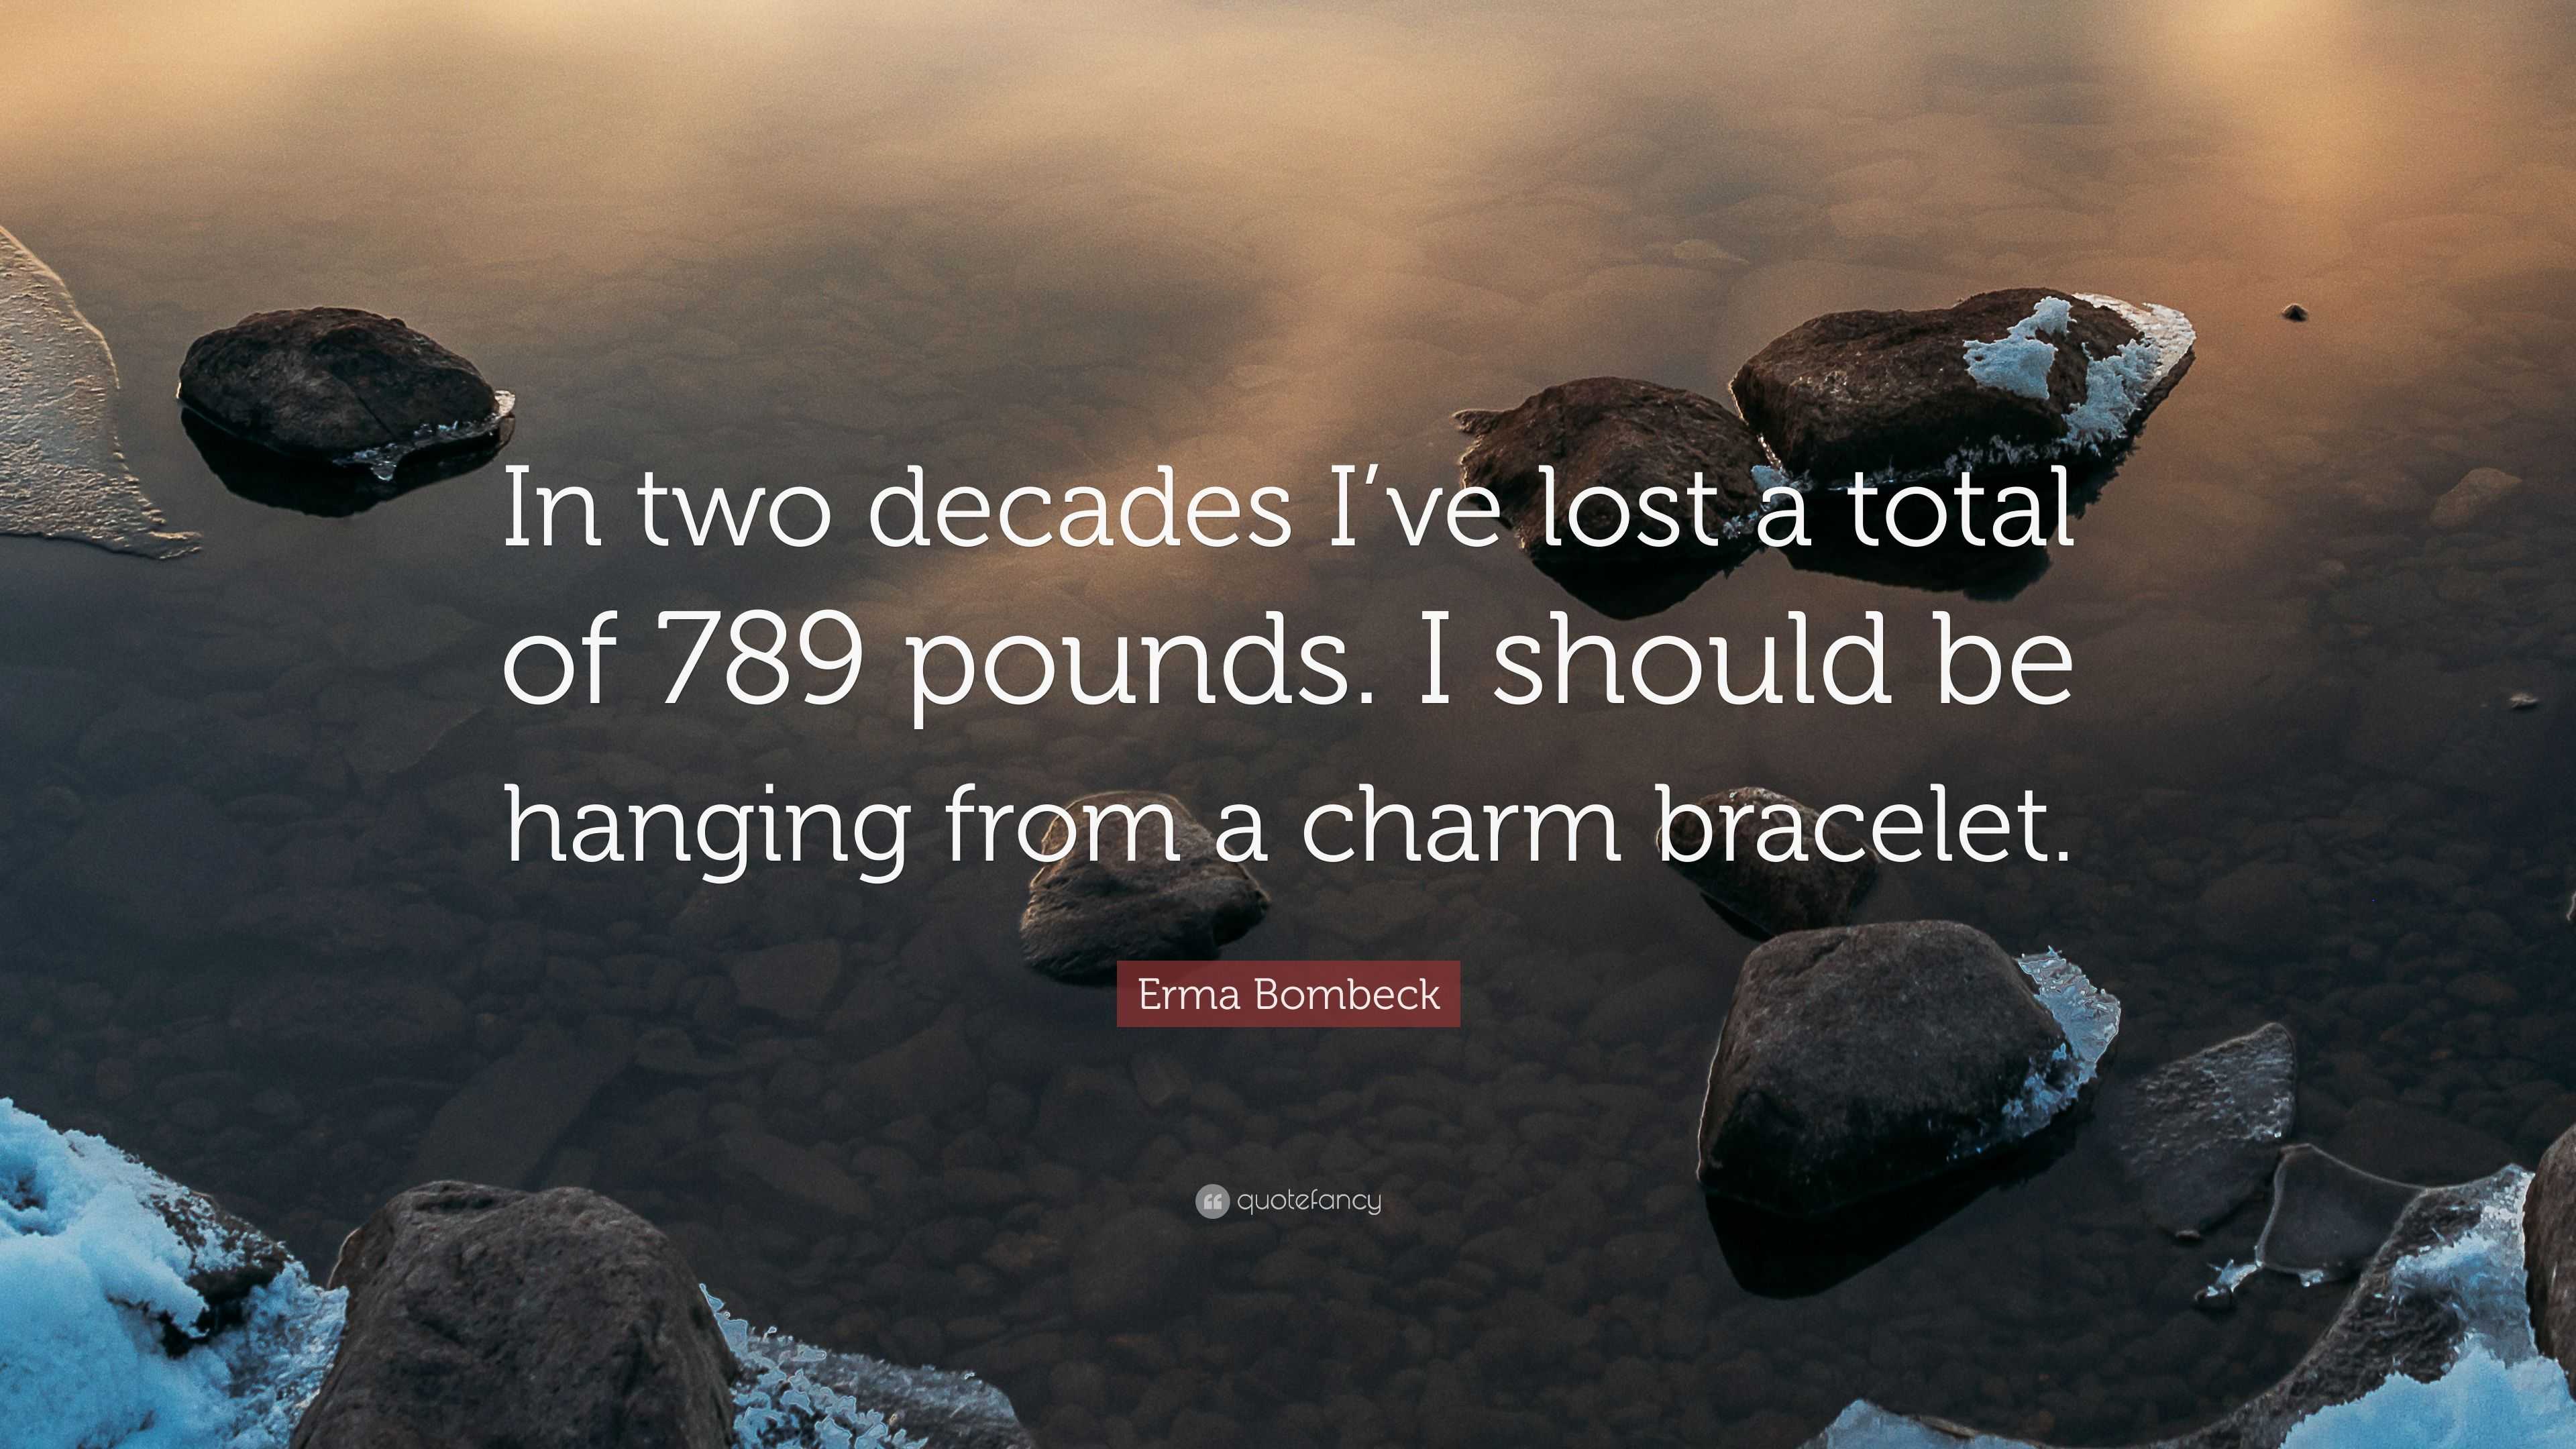 Erma Bombeck Quote: “In two decades I've lost a total of 789 pounds. I  should